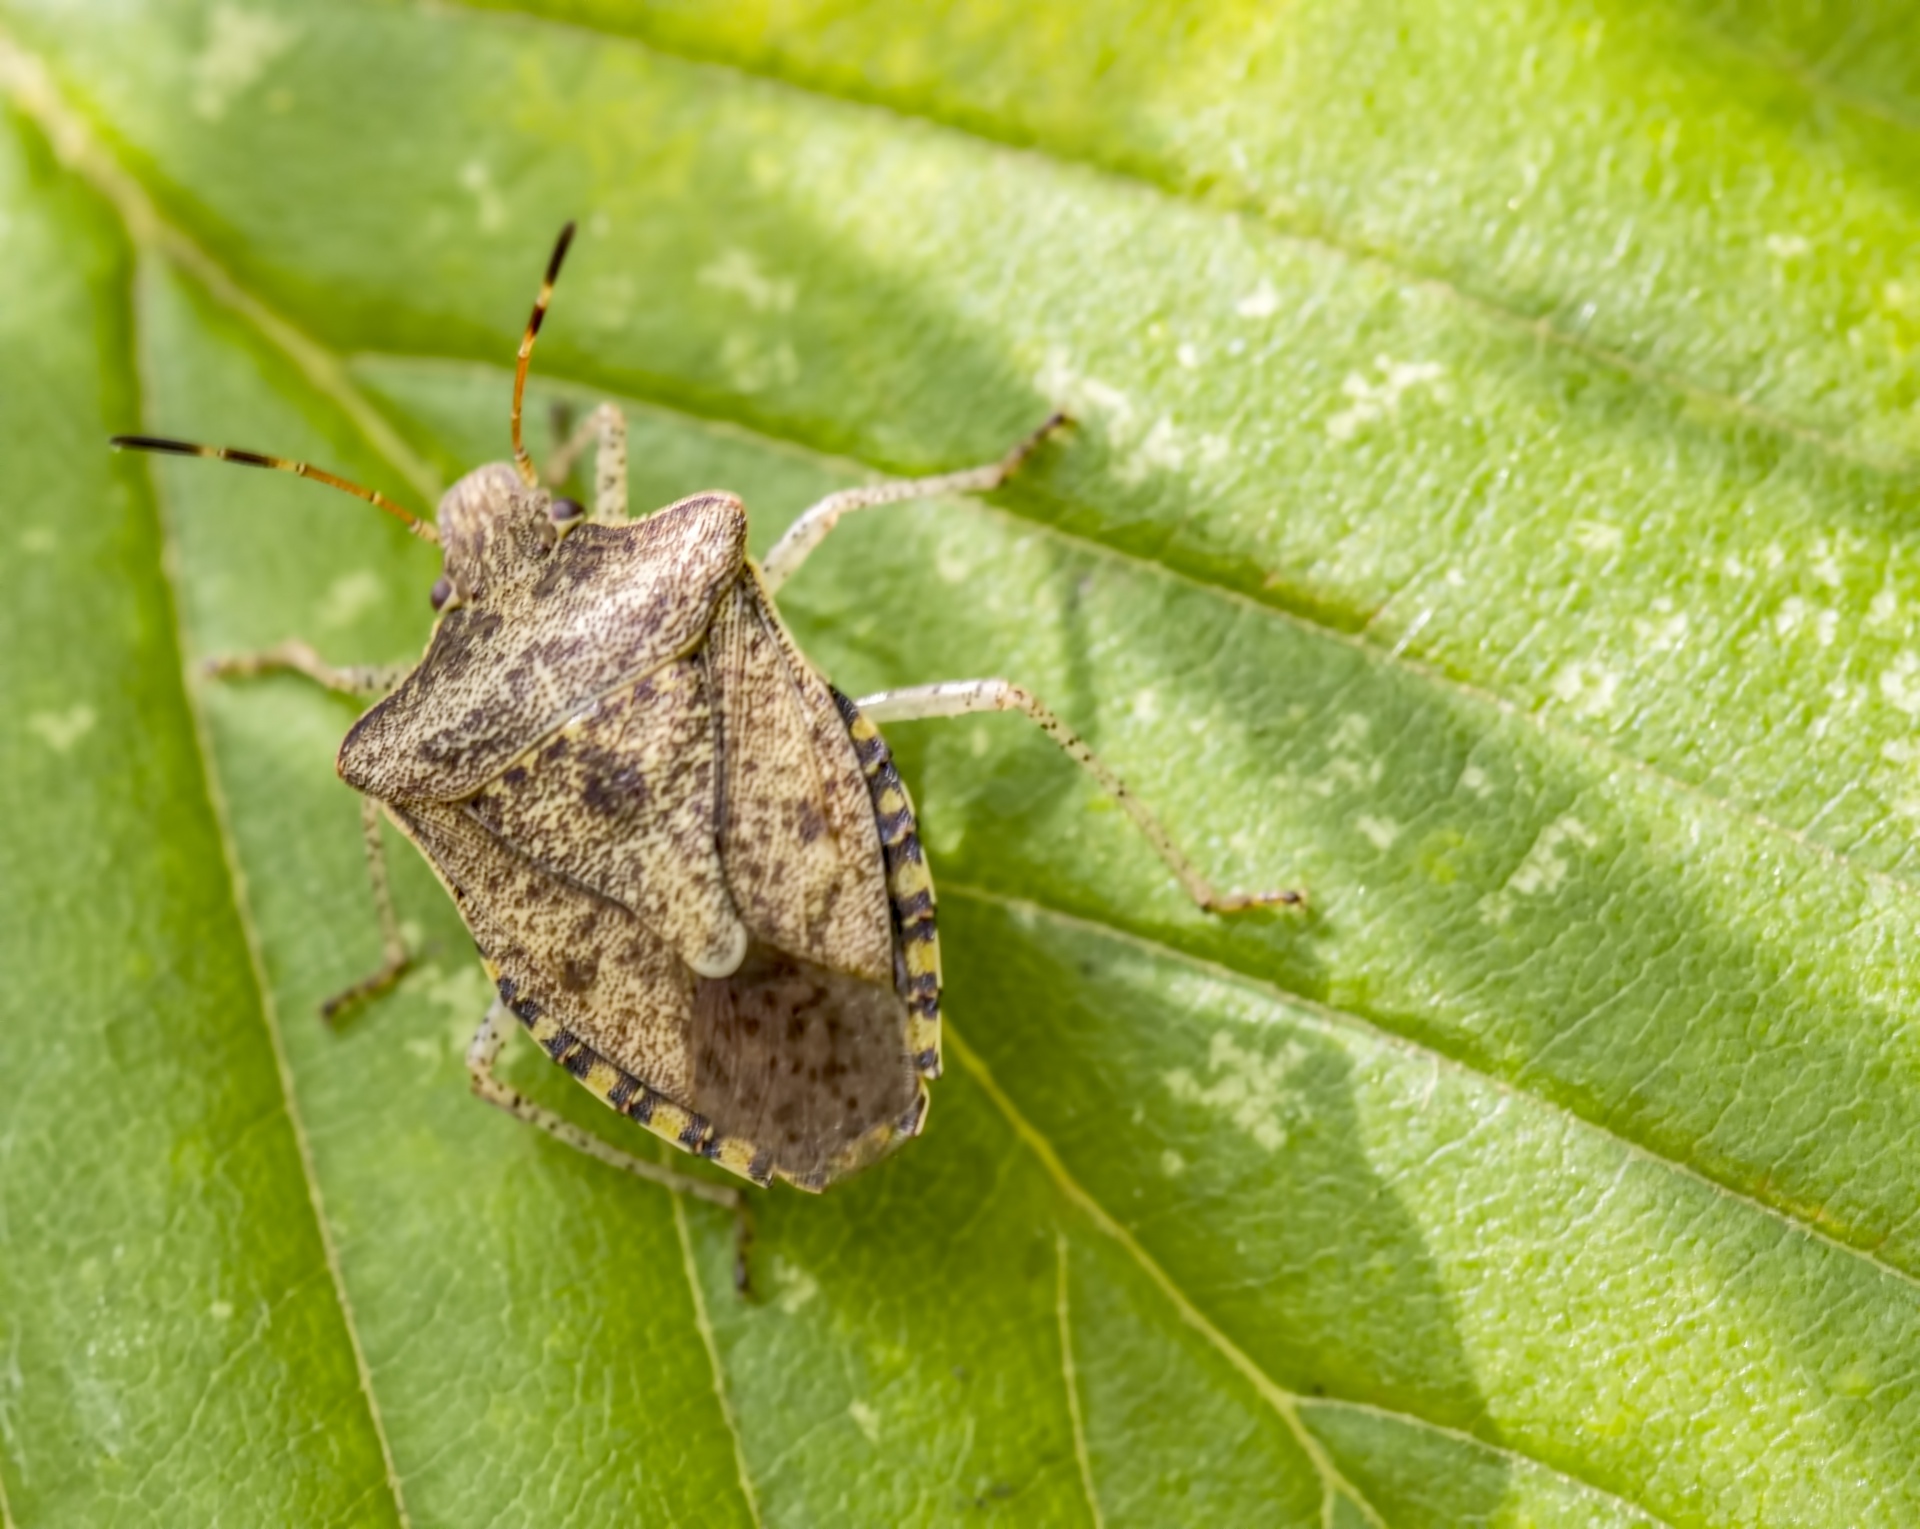 How to Get Rid of Stink Bugs With Essential Oils